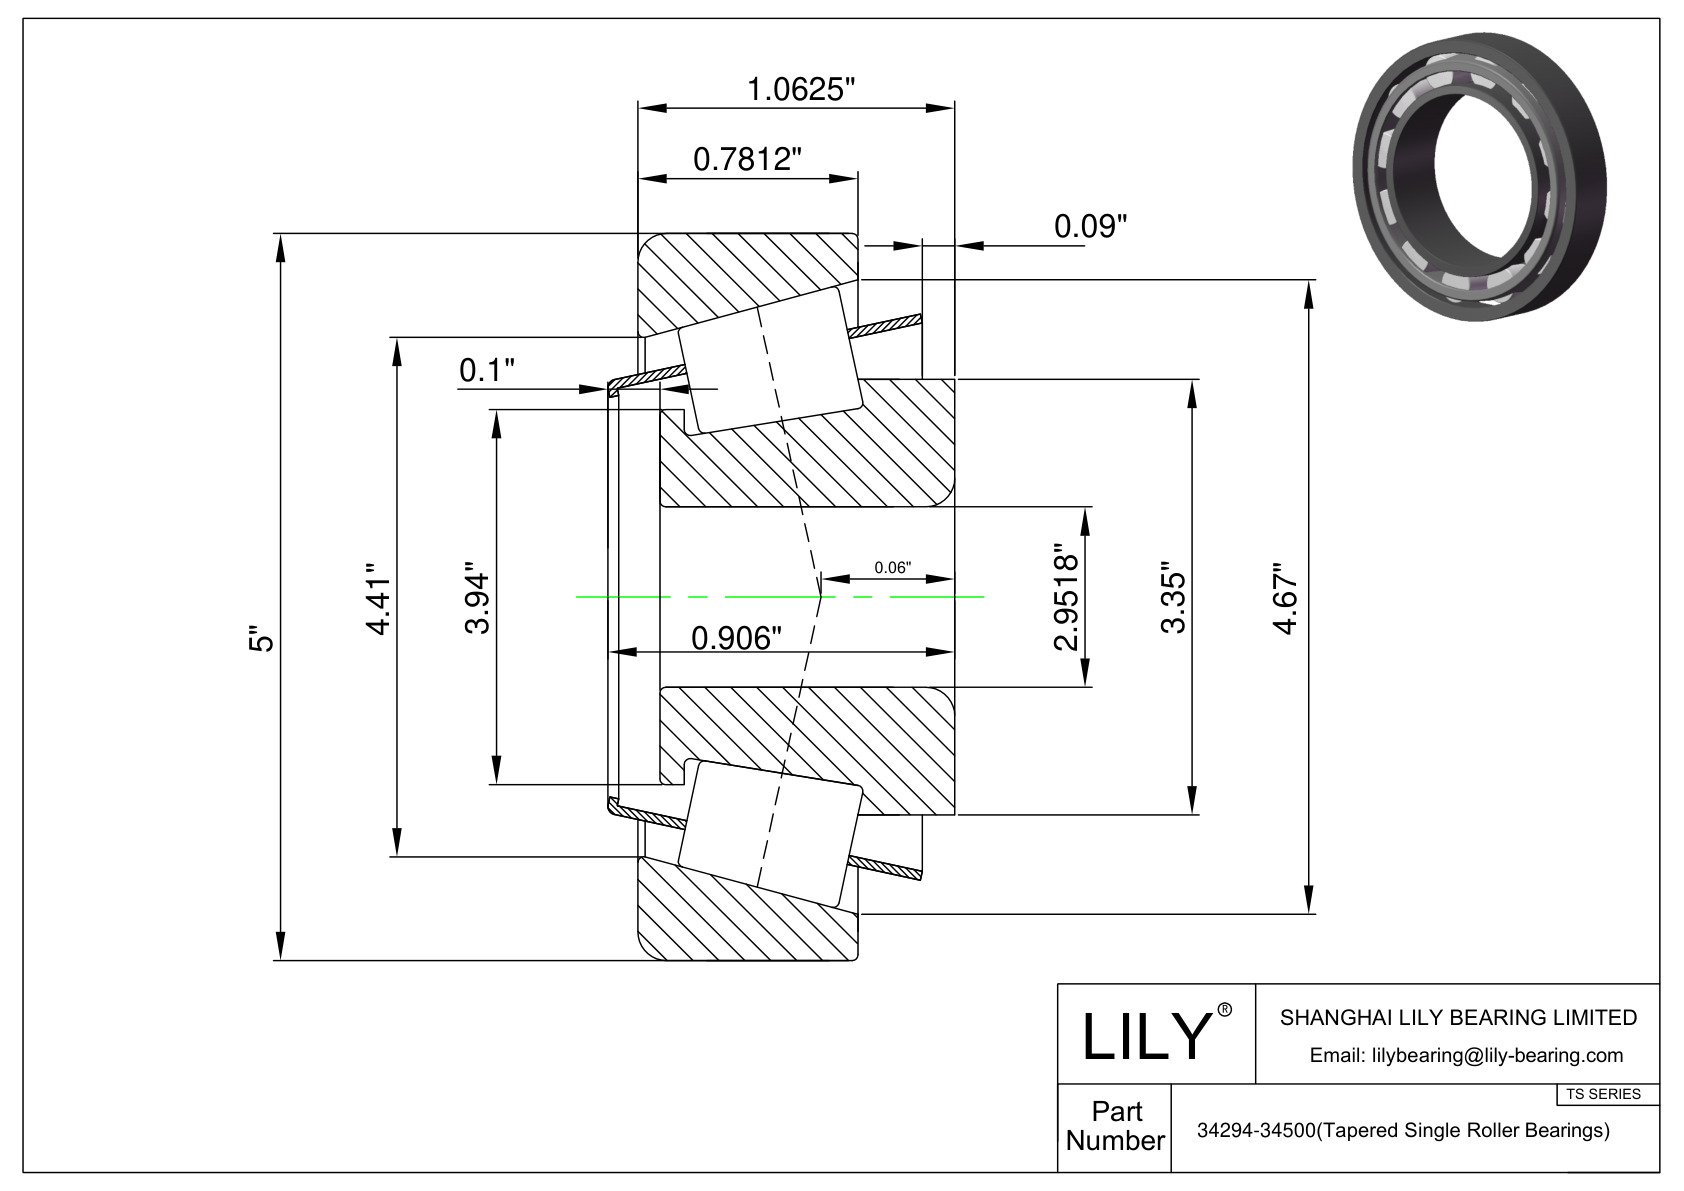 34294-34500 TS (Tapered Single Roller Bearings) (Imperial) cad drawing